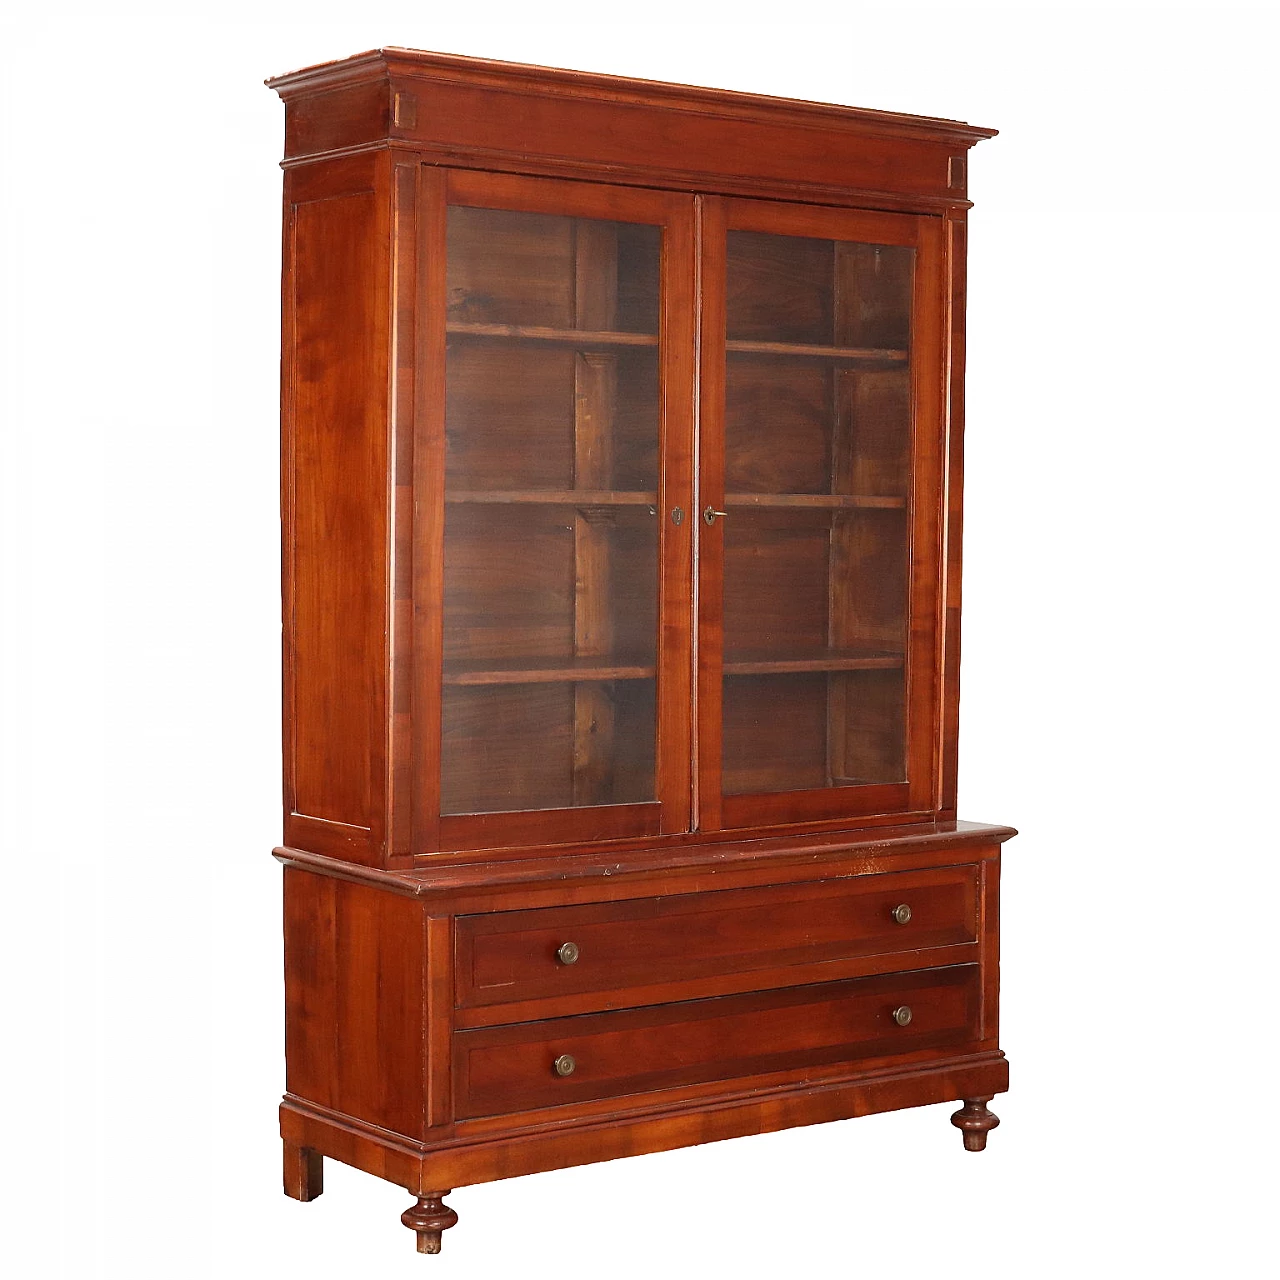 Cherrywood bookcase with drawers and glass doors 1